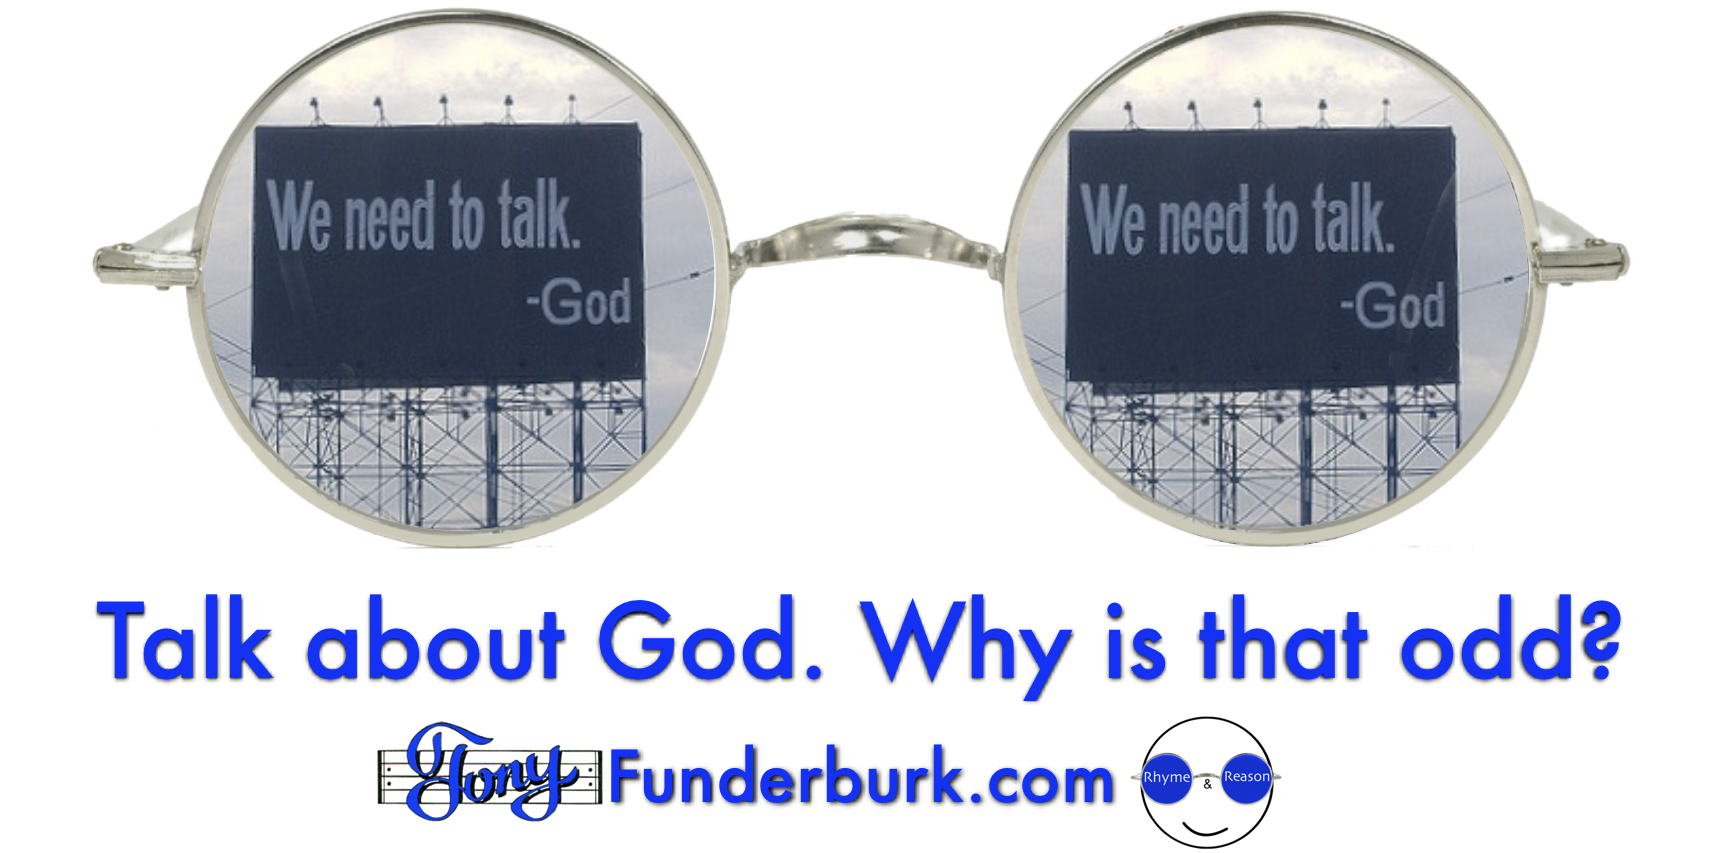 Talk to God - why is that odd?